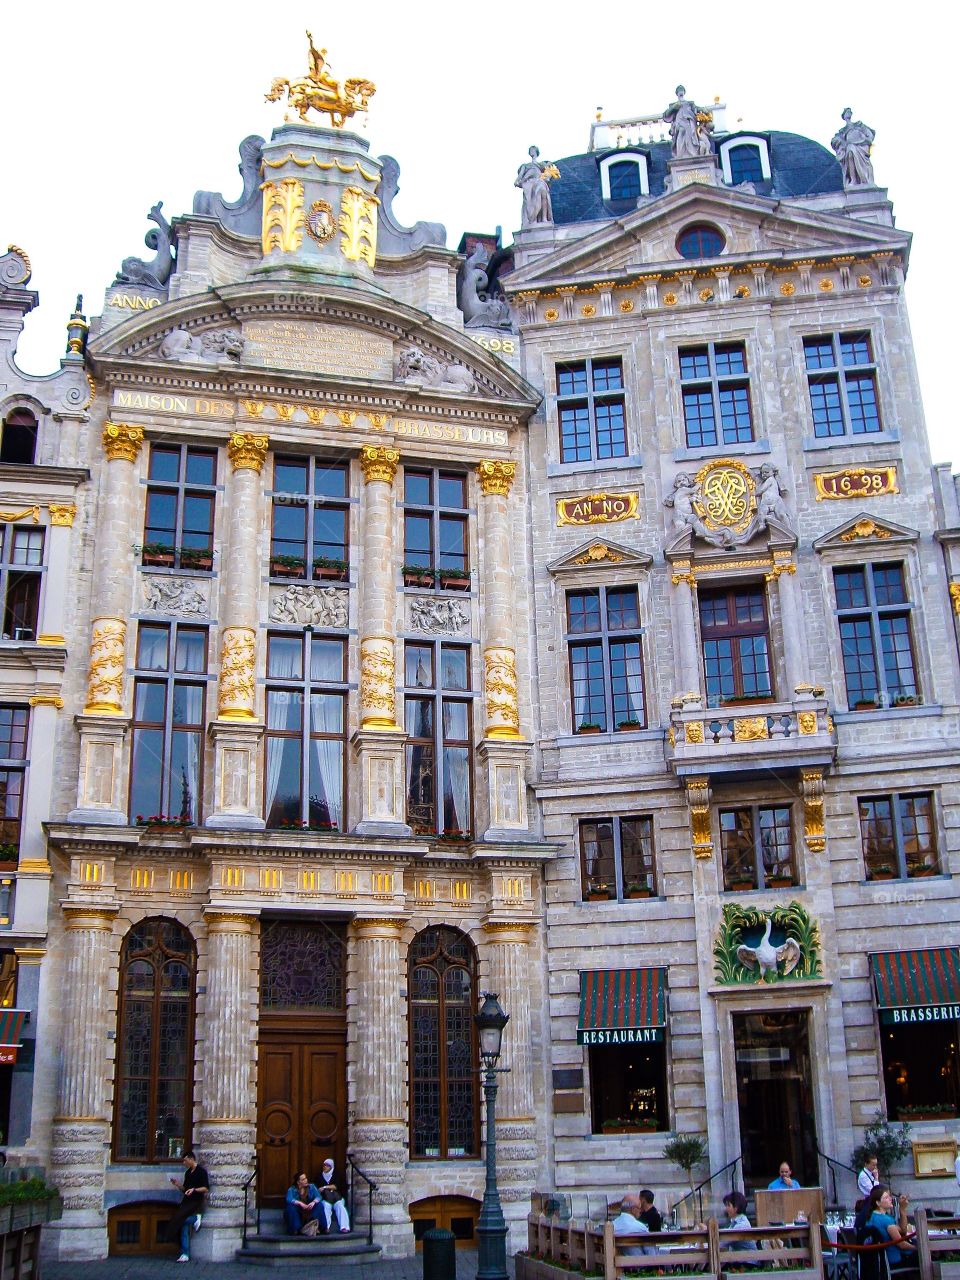 The Grand Palace, Brussels, Belgium